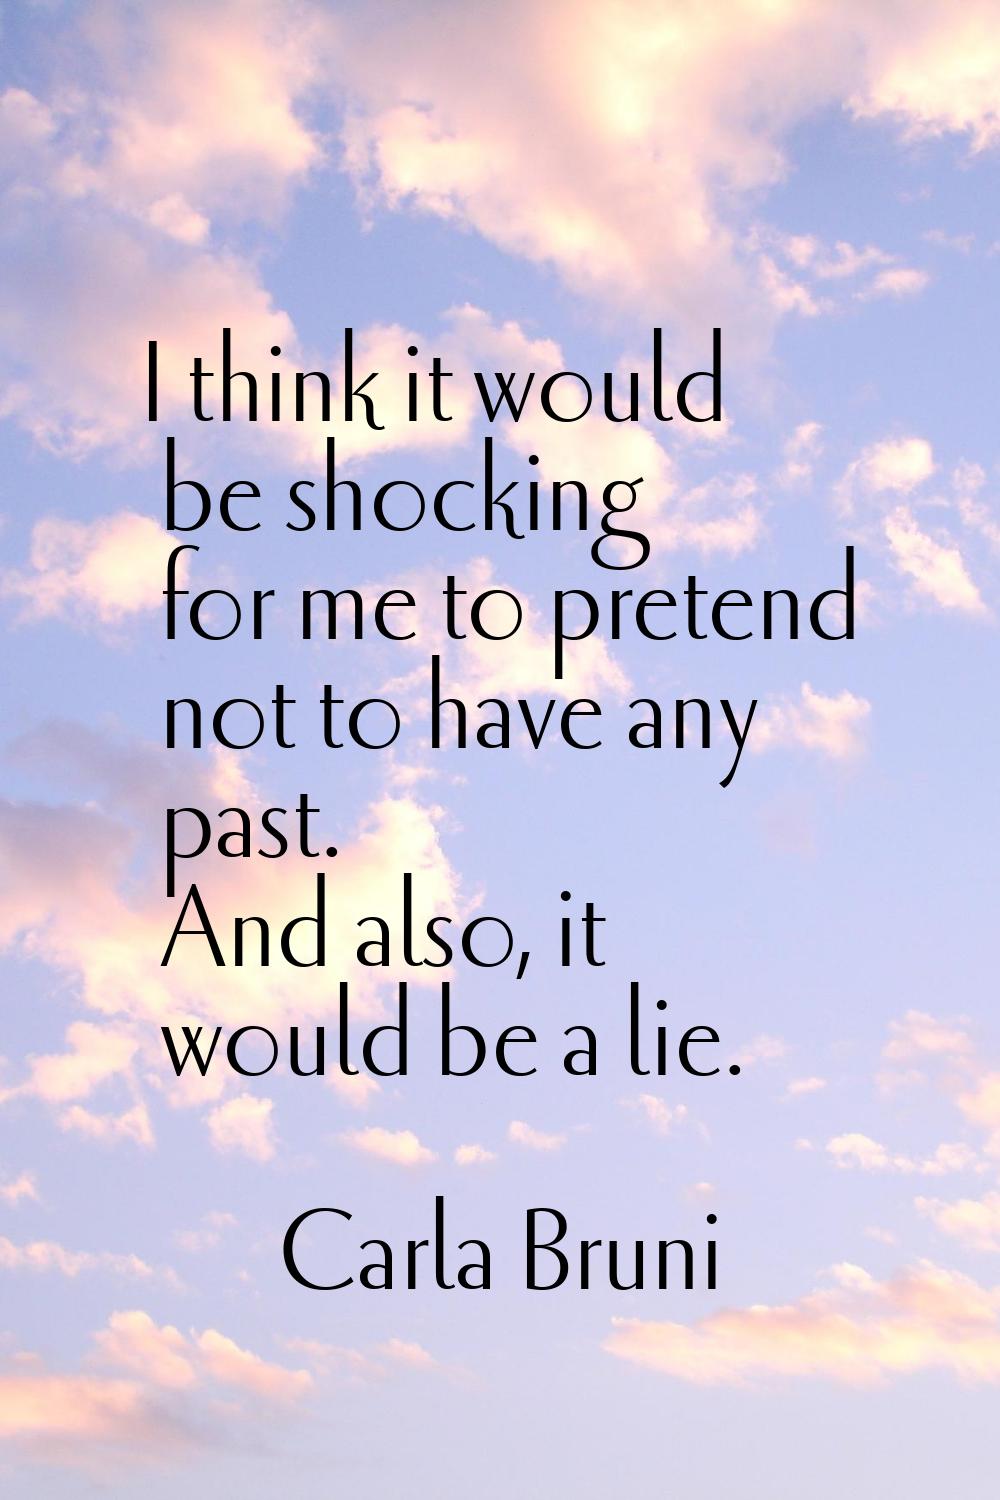 I think it would be shocking for me to pretend not to have any past. And also, it would be a lie.